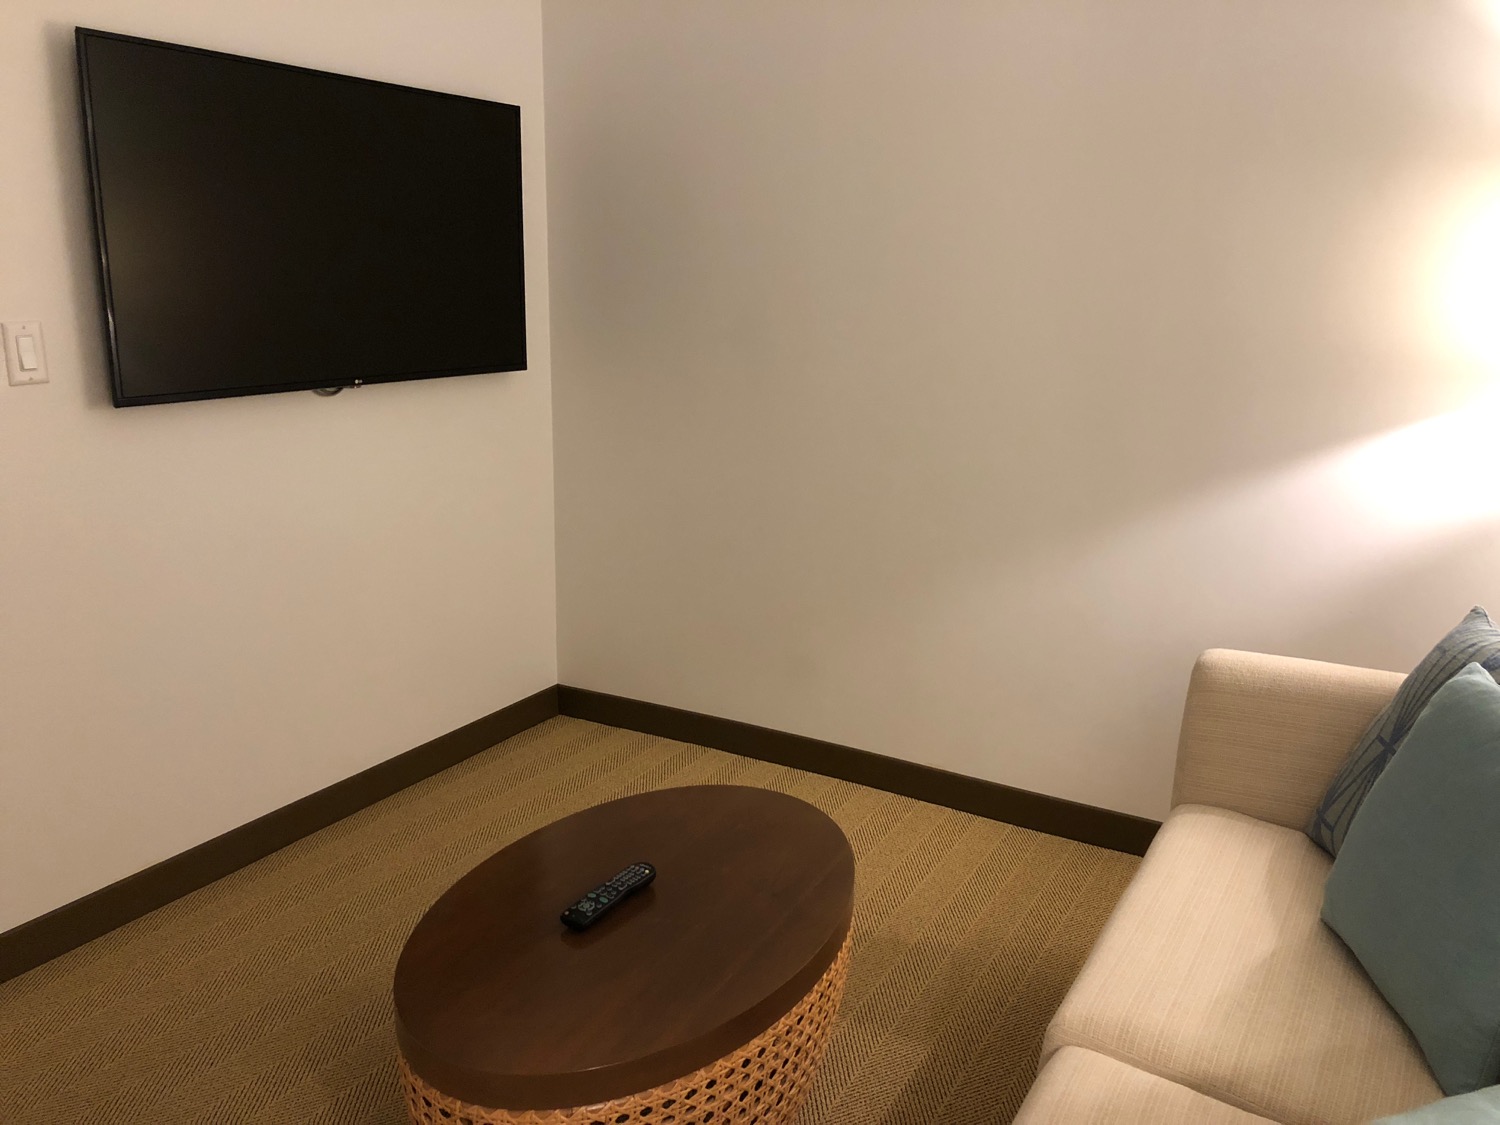 a tv on the wall